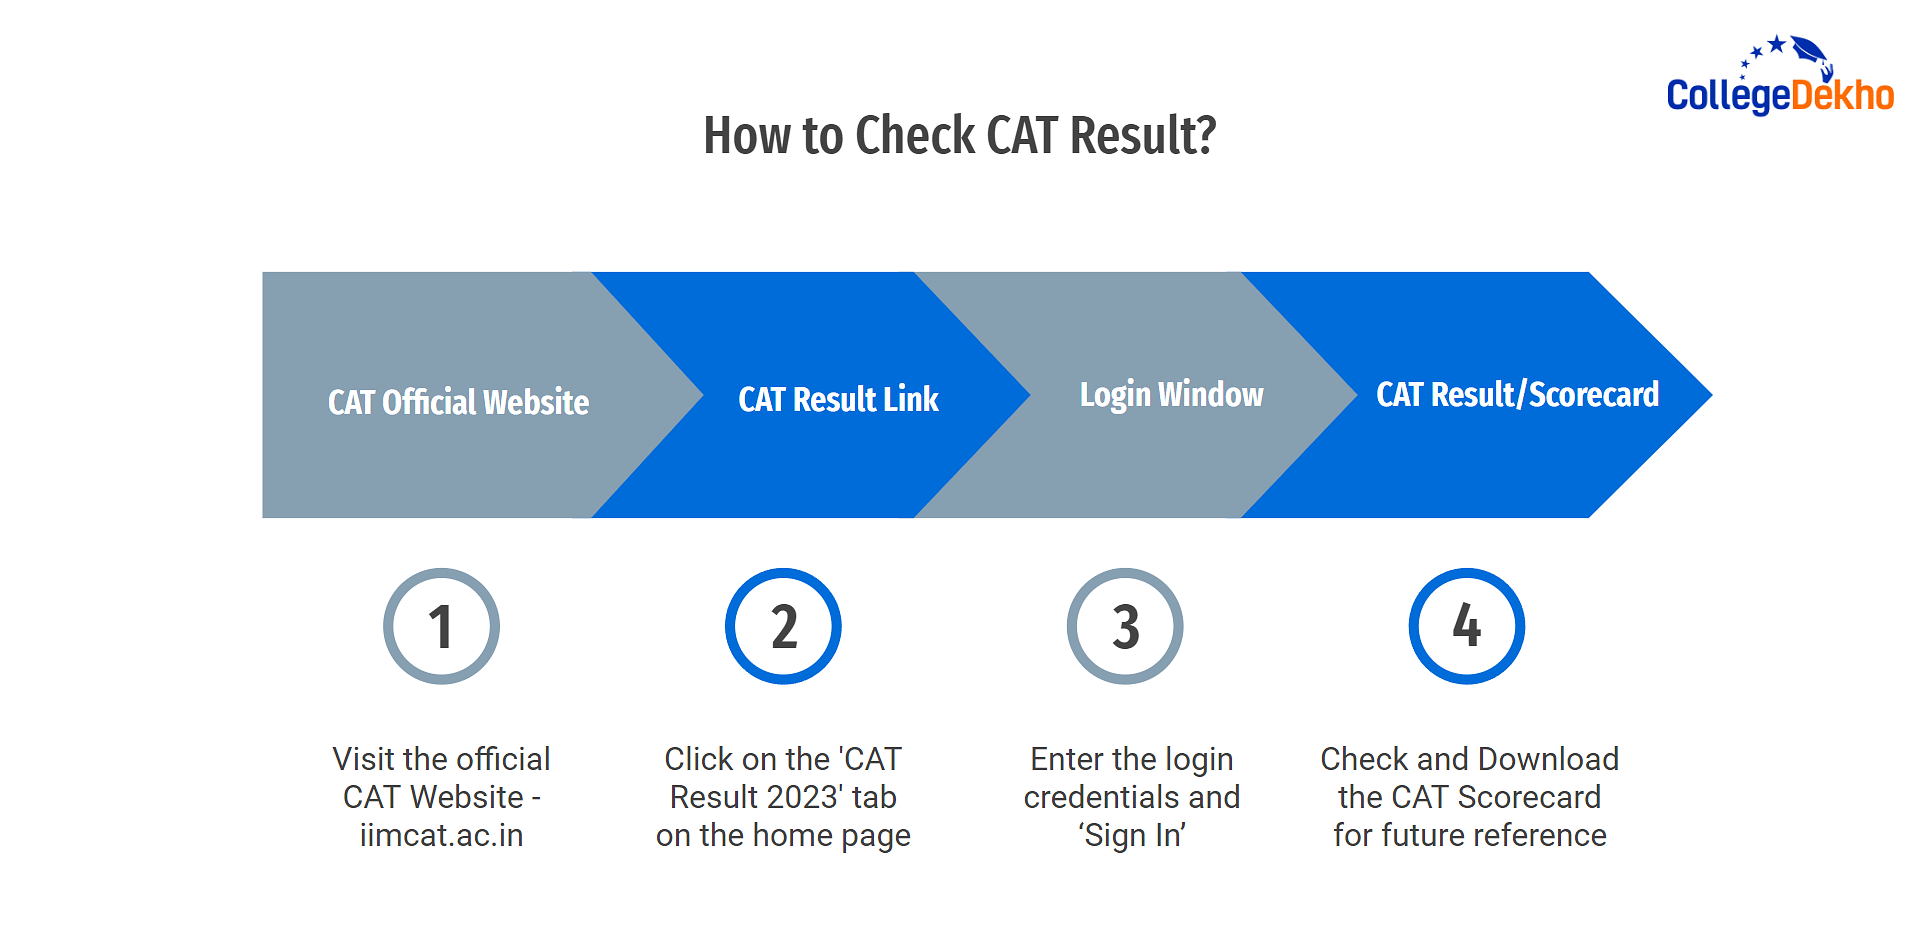 How to Check CAT Result